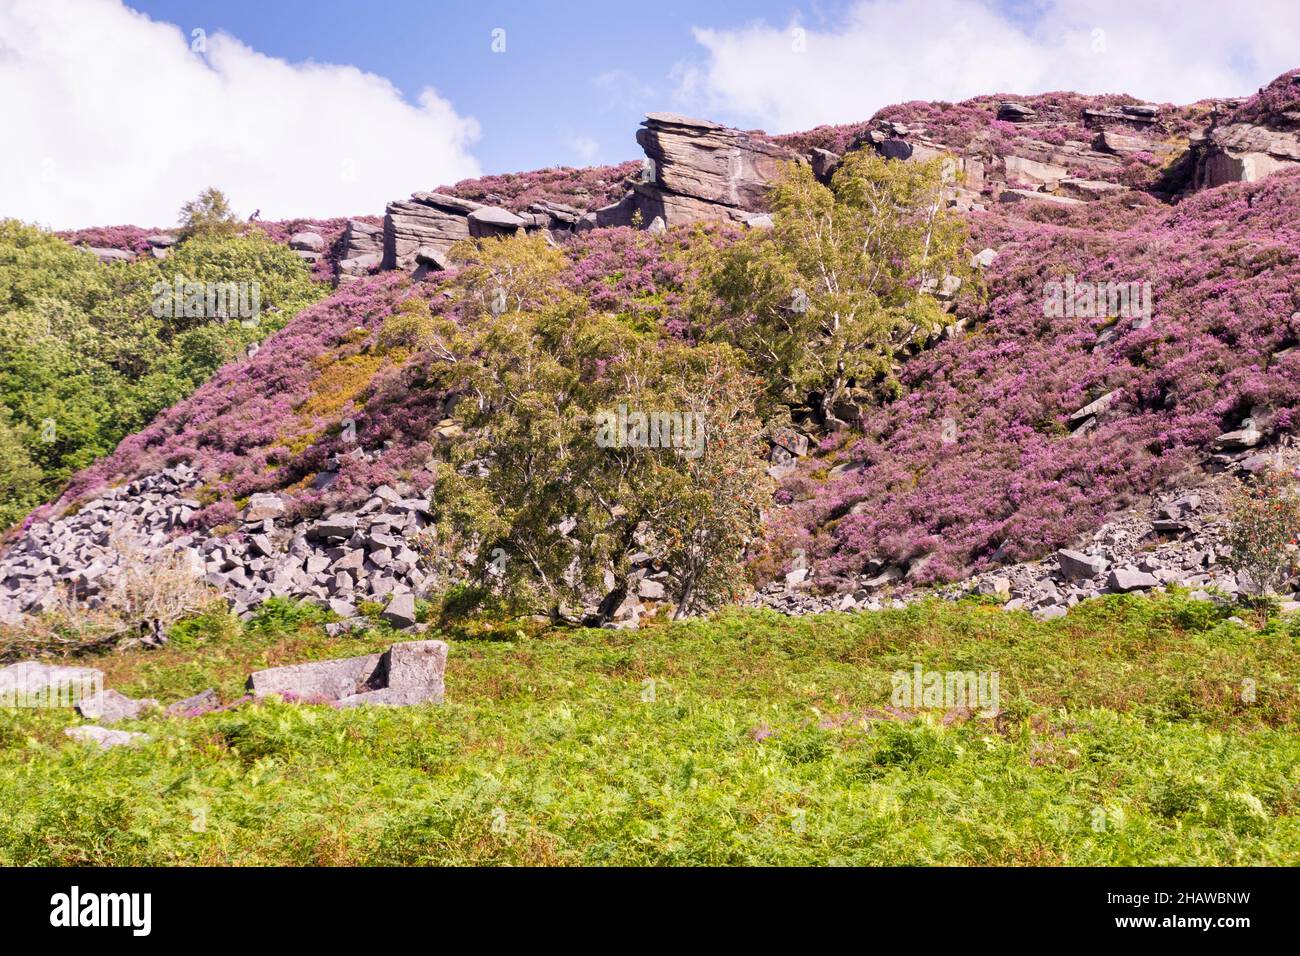 The beautiful Peak District with pink flowering heather on a rock overlooking the moorland landscape Stock Photo